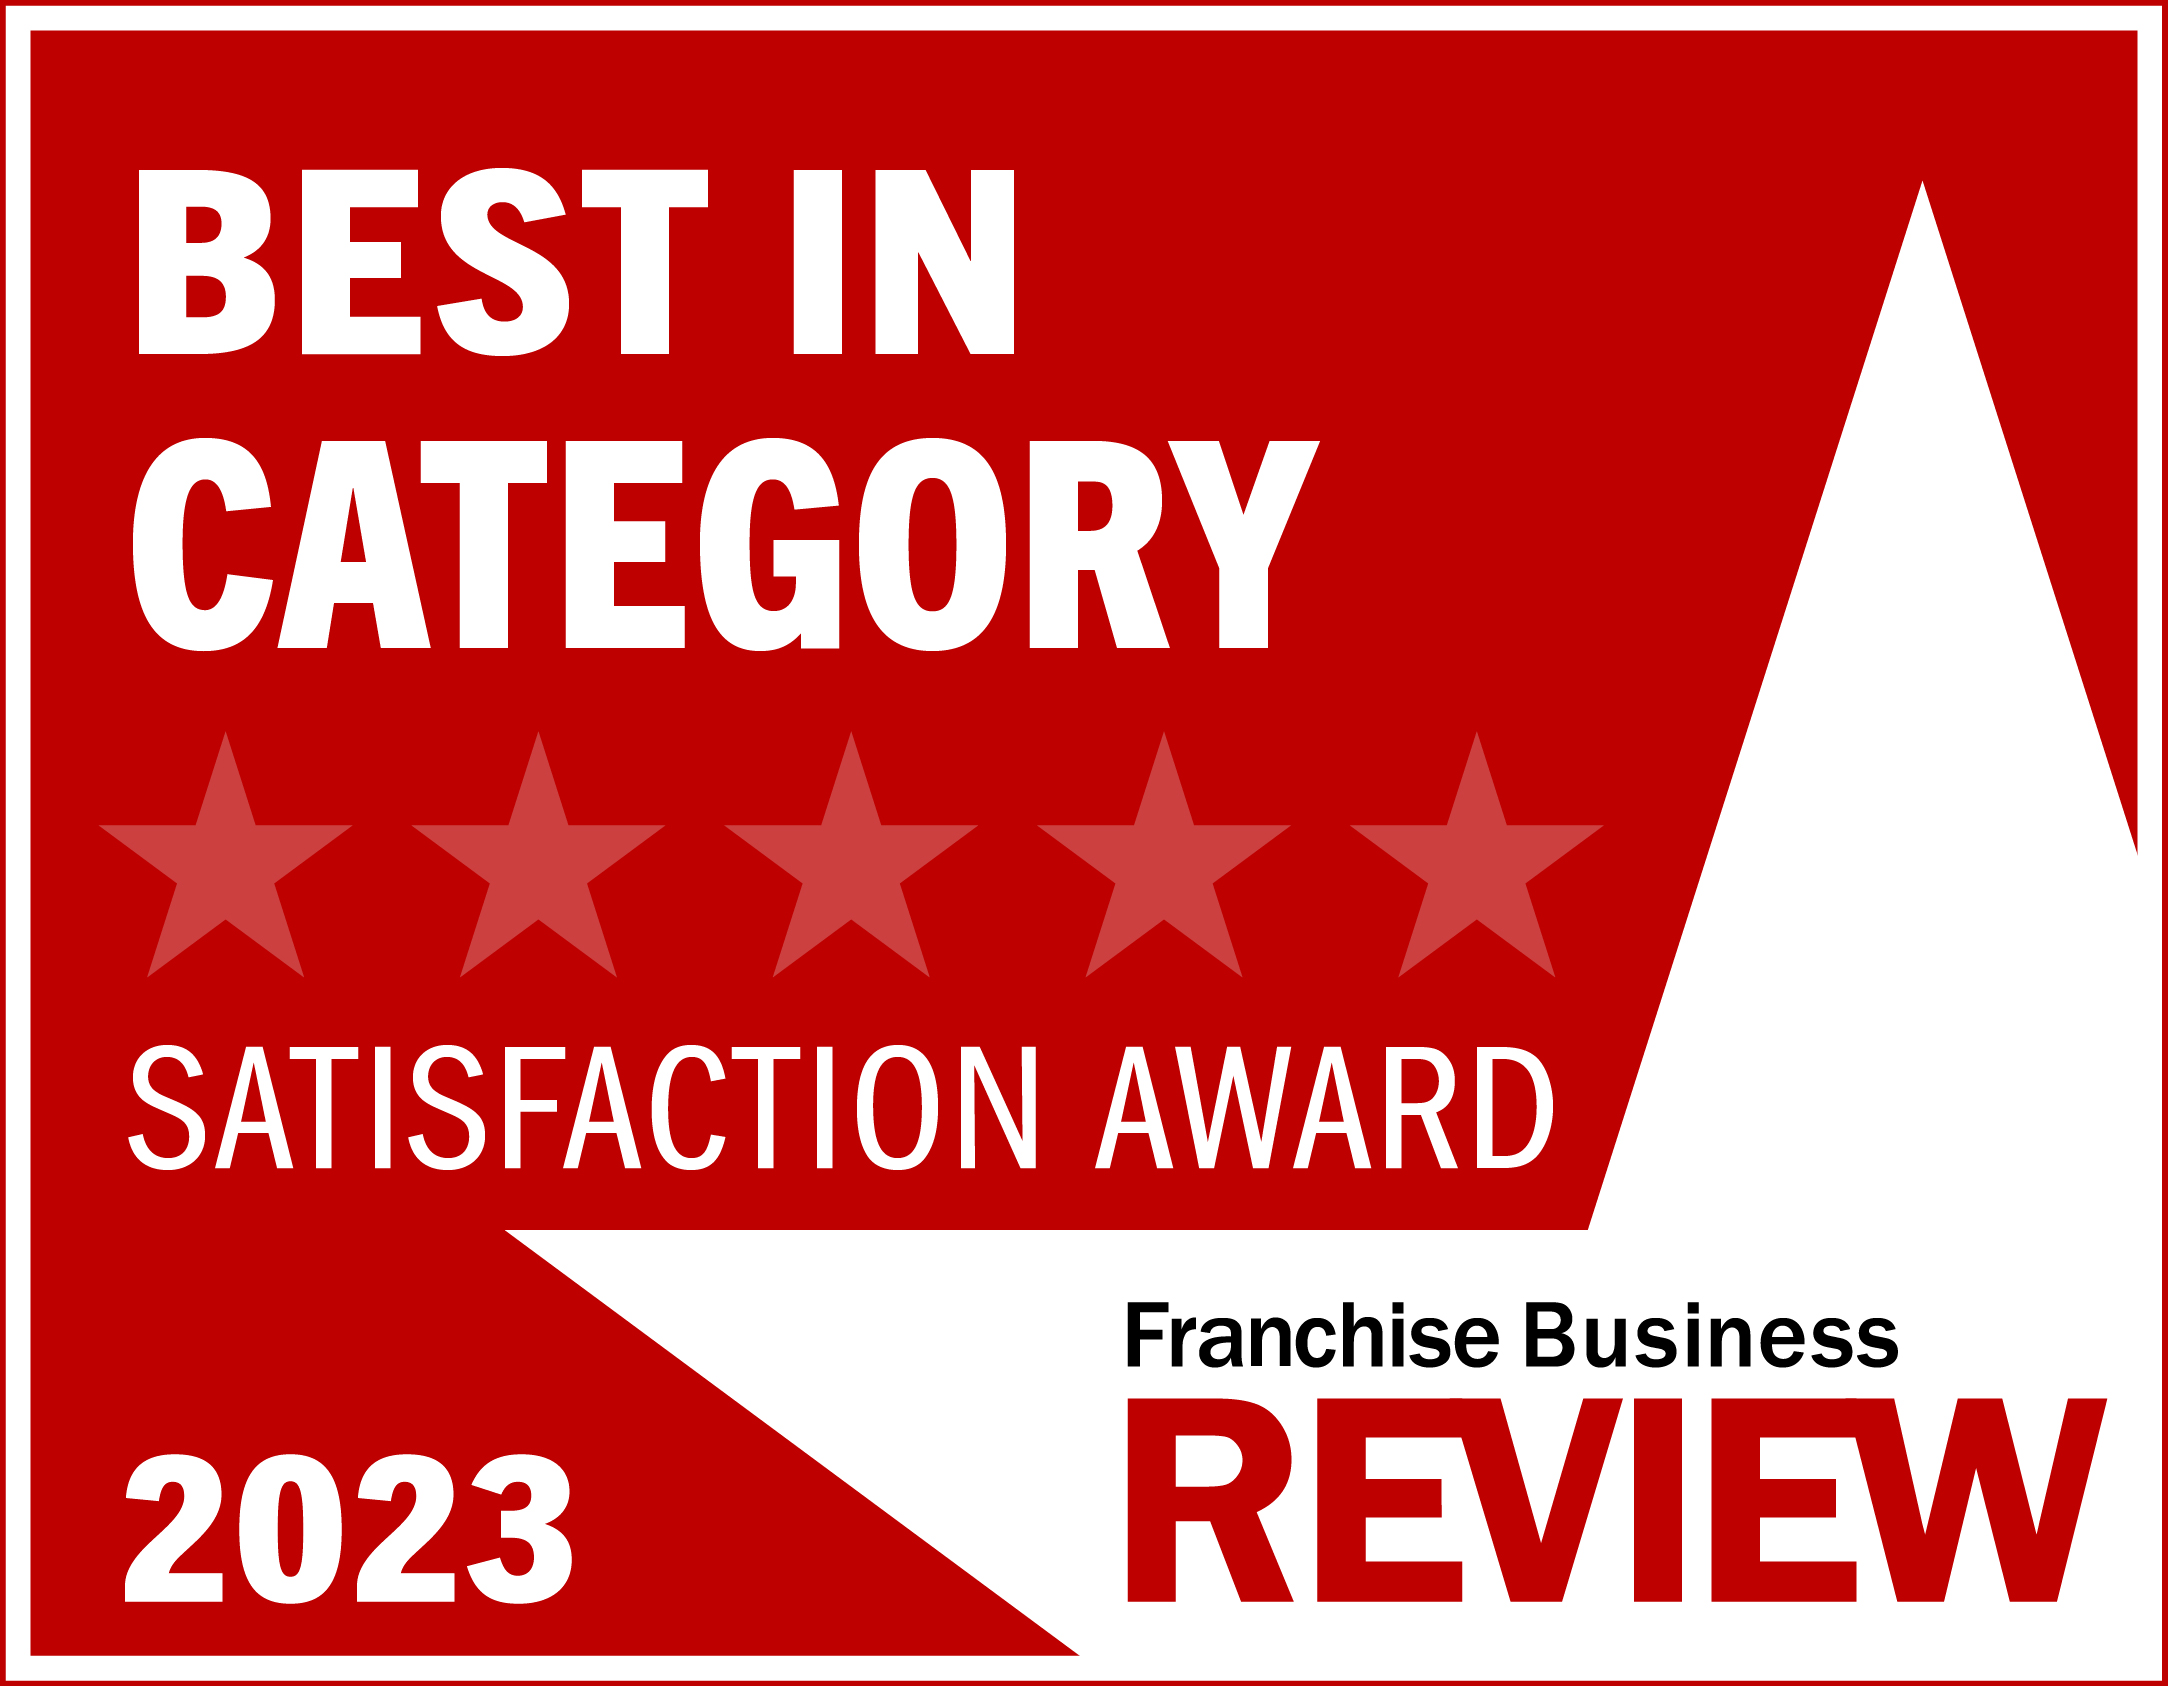 Payroll Vault Named a 2023 Best-in-Category Franchise by Franchise Business Review